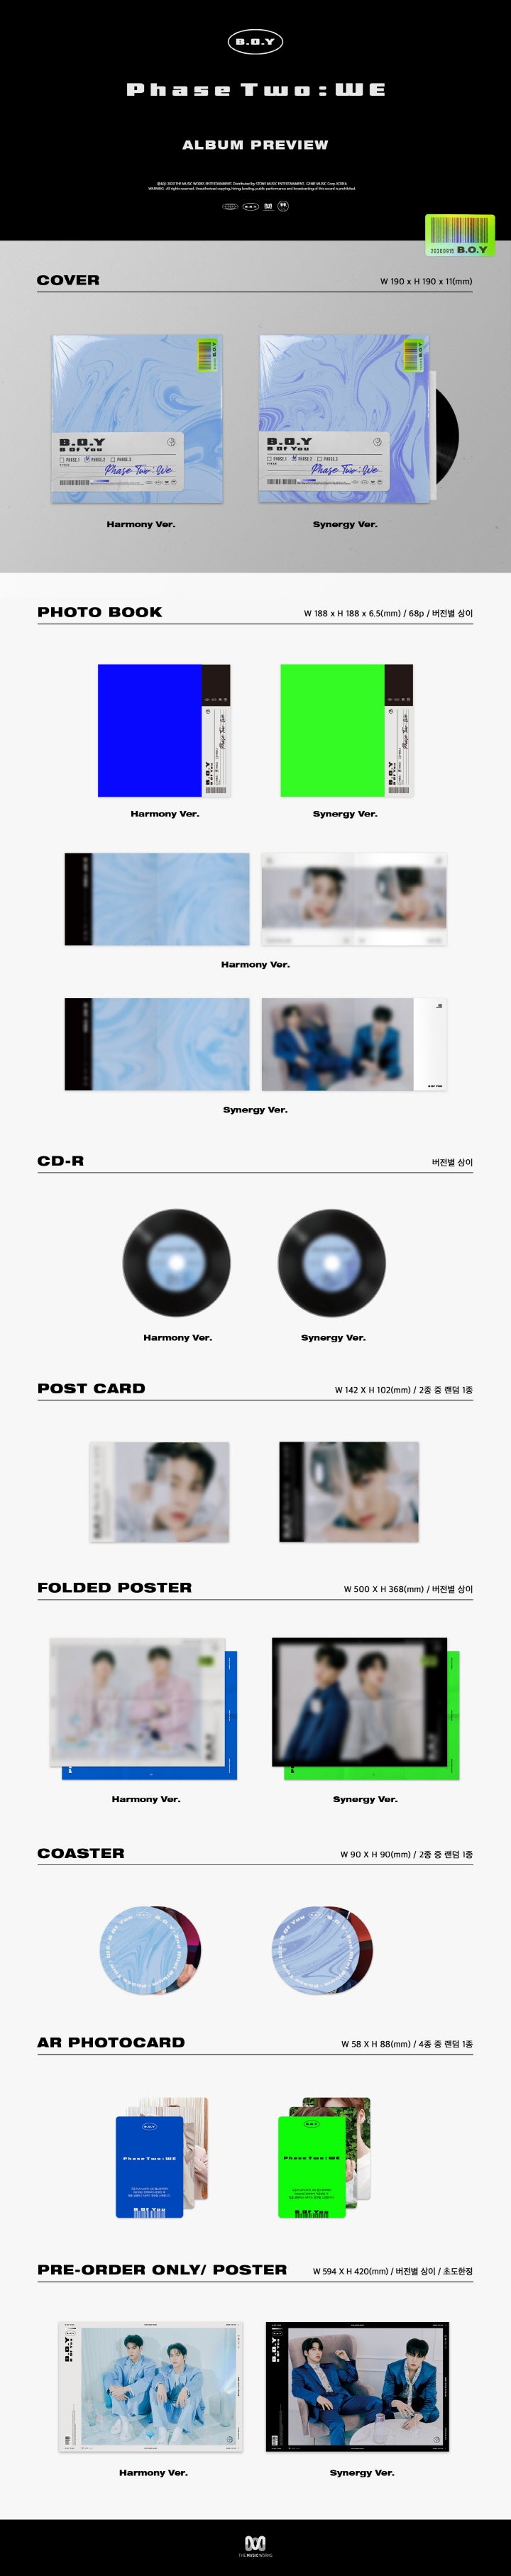 1 CD
1 Folding Poster On Pack
1 Photo Book (68 pages)
1 Post Card
1 Coaster
1 AR Photo Card